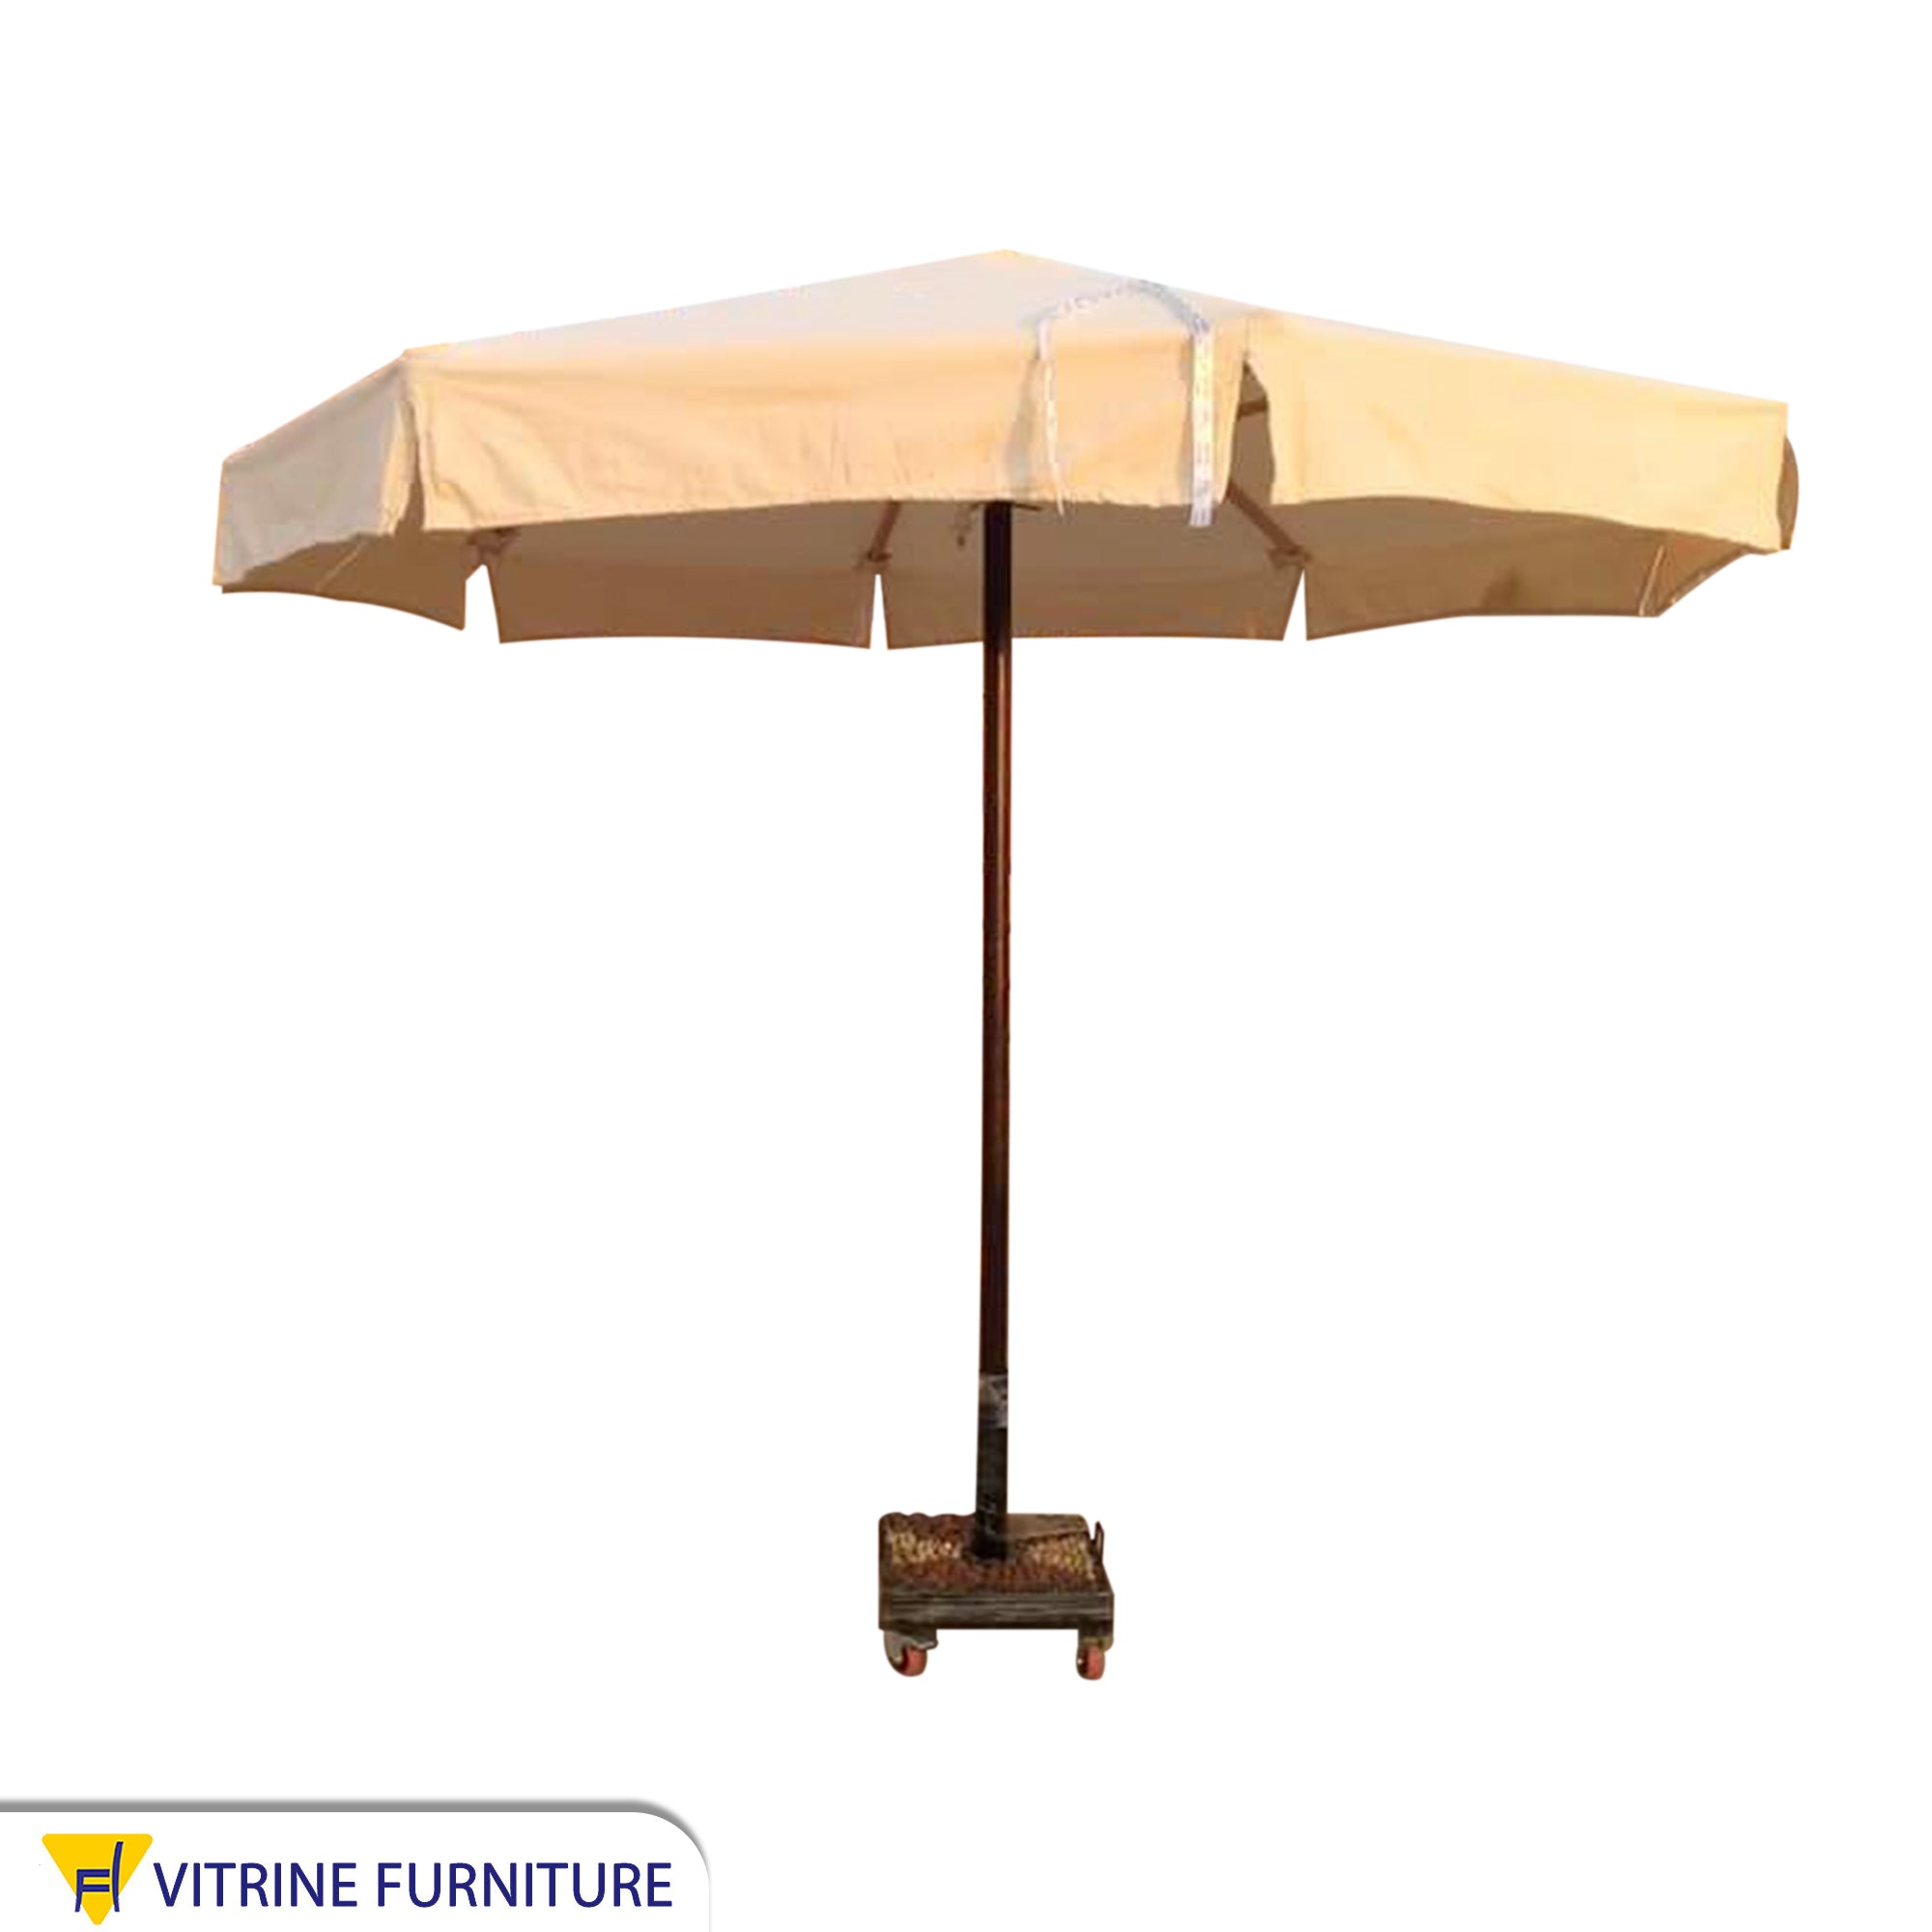 Furniture canopy for outdoor spaces